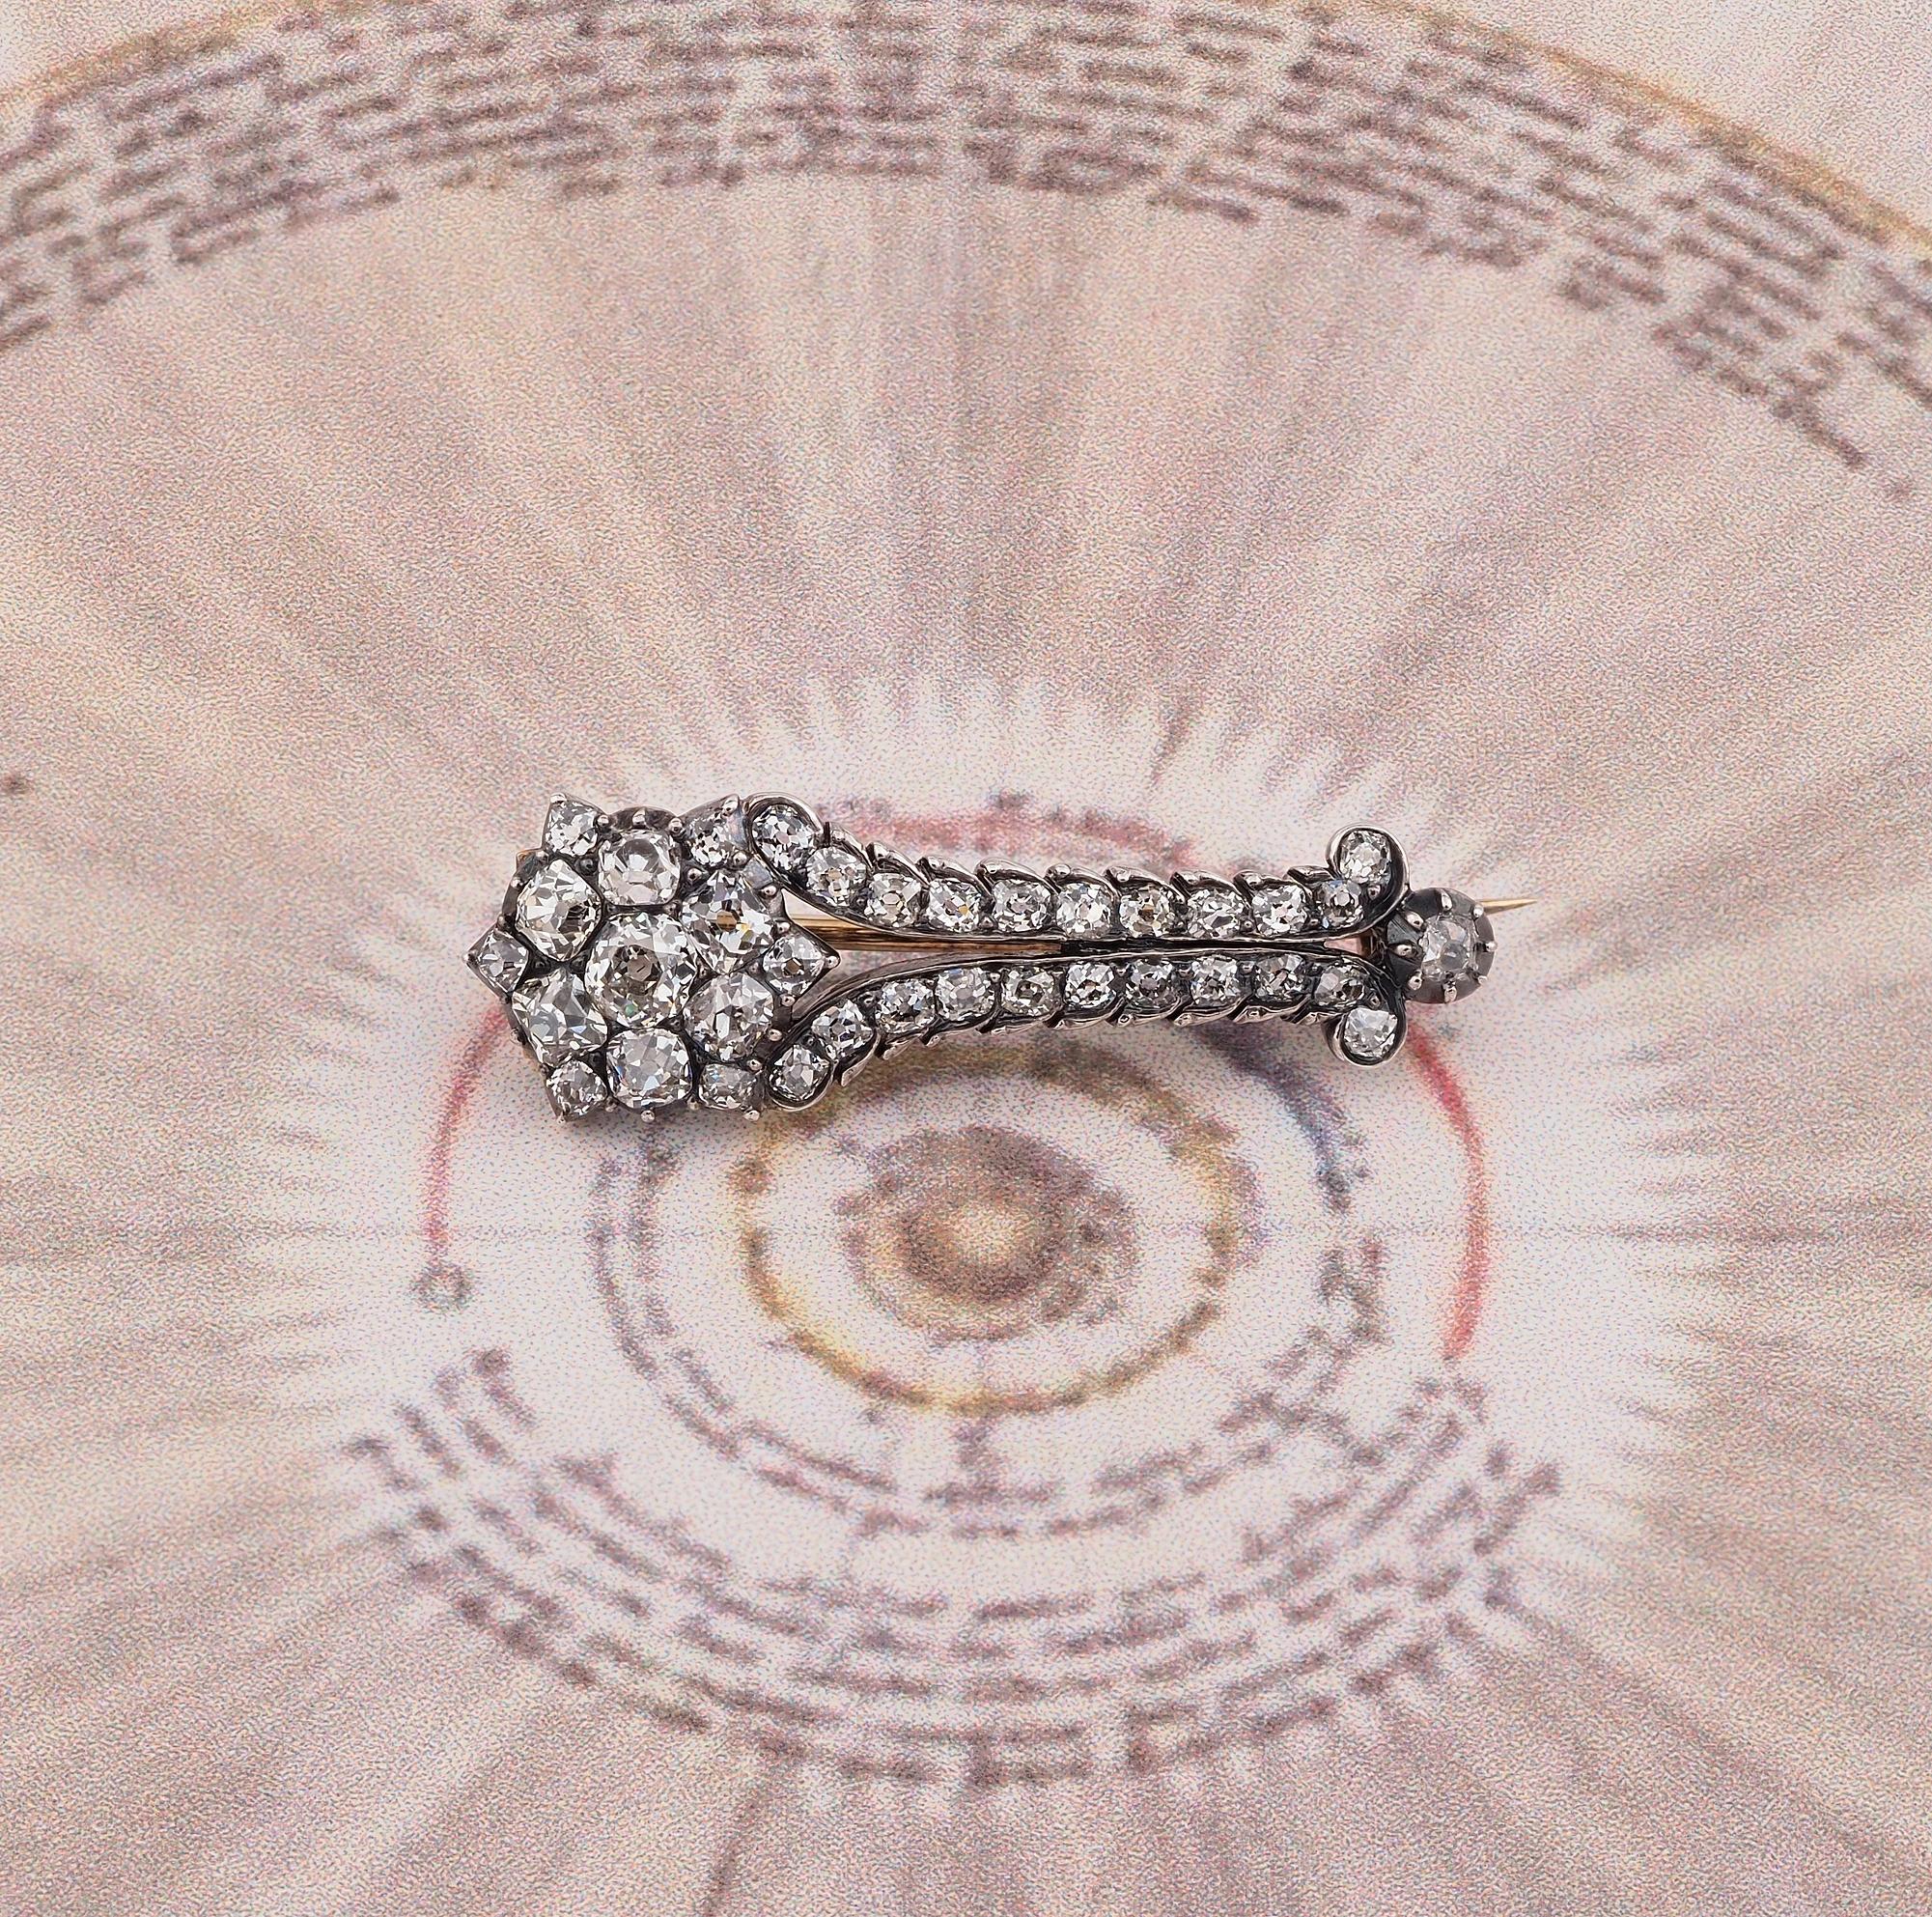 Celestial Halley’s Comet
A rare and stunning example of Georgian Halley’s comet brooch, superb little example richly set with old mine cut Diamonds as hardly found instead of rose cut Diamonds, this makes it highly sparkly as you would expect from a